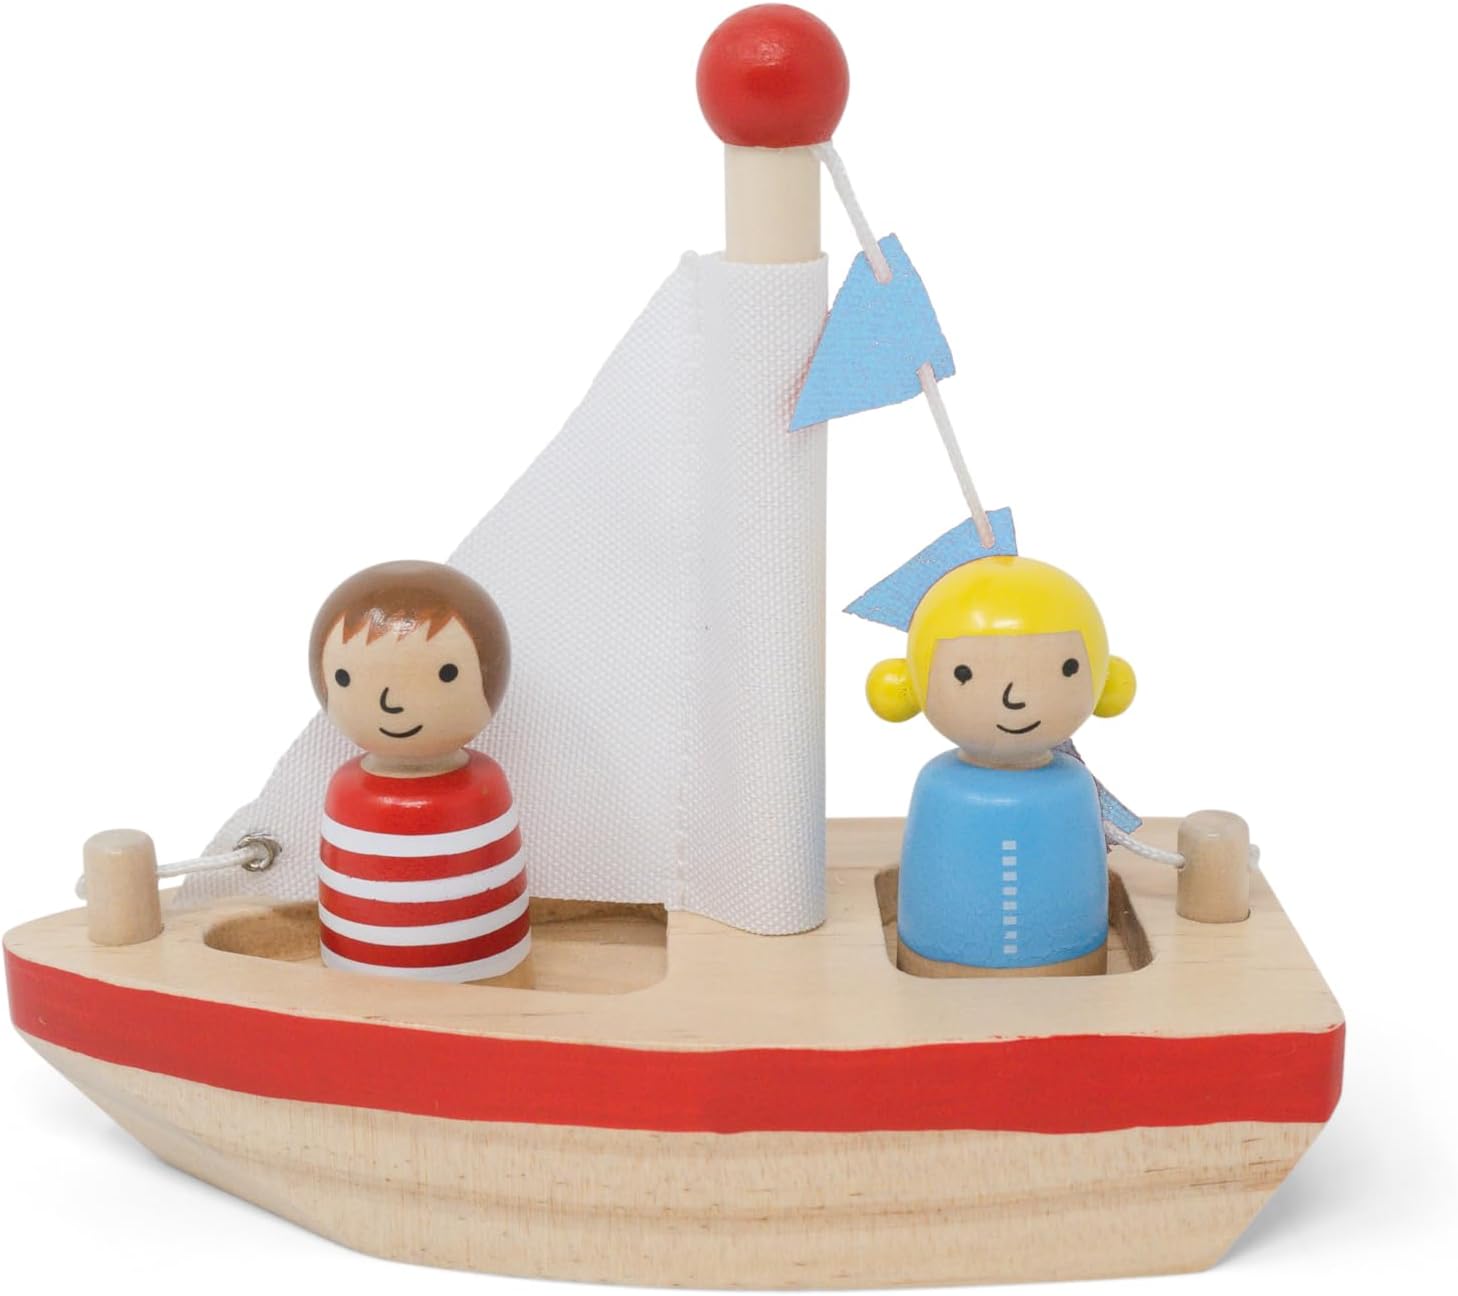 Boats and Buddies – 3 Piece Wooden Floating Bath Toys